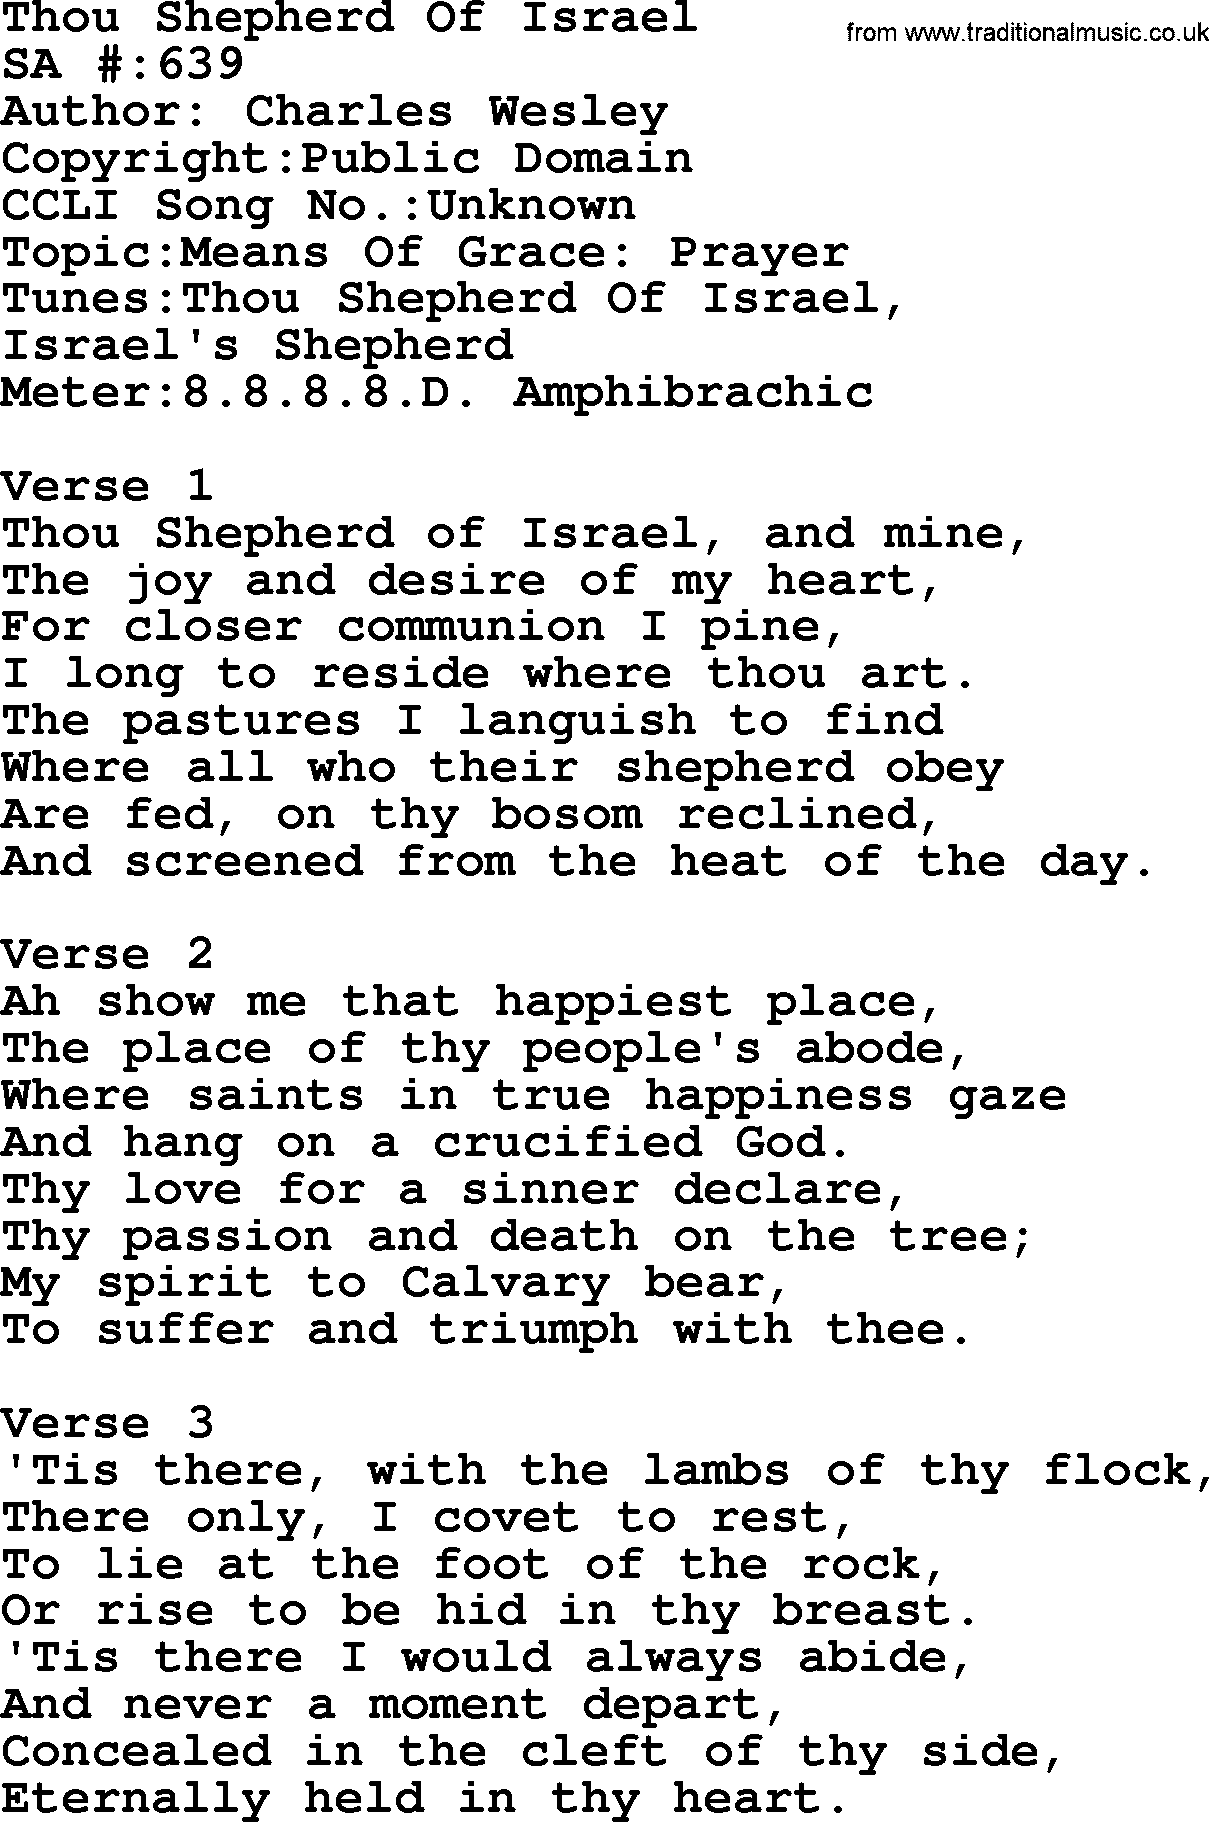 Salvation Army Hymnal, title: Thou Shepherd Of Israel, with lyrics and PDF,